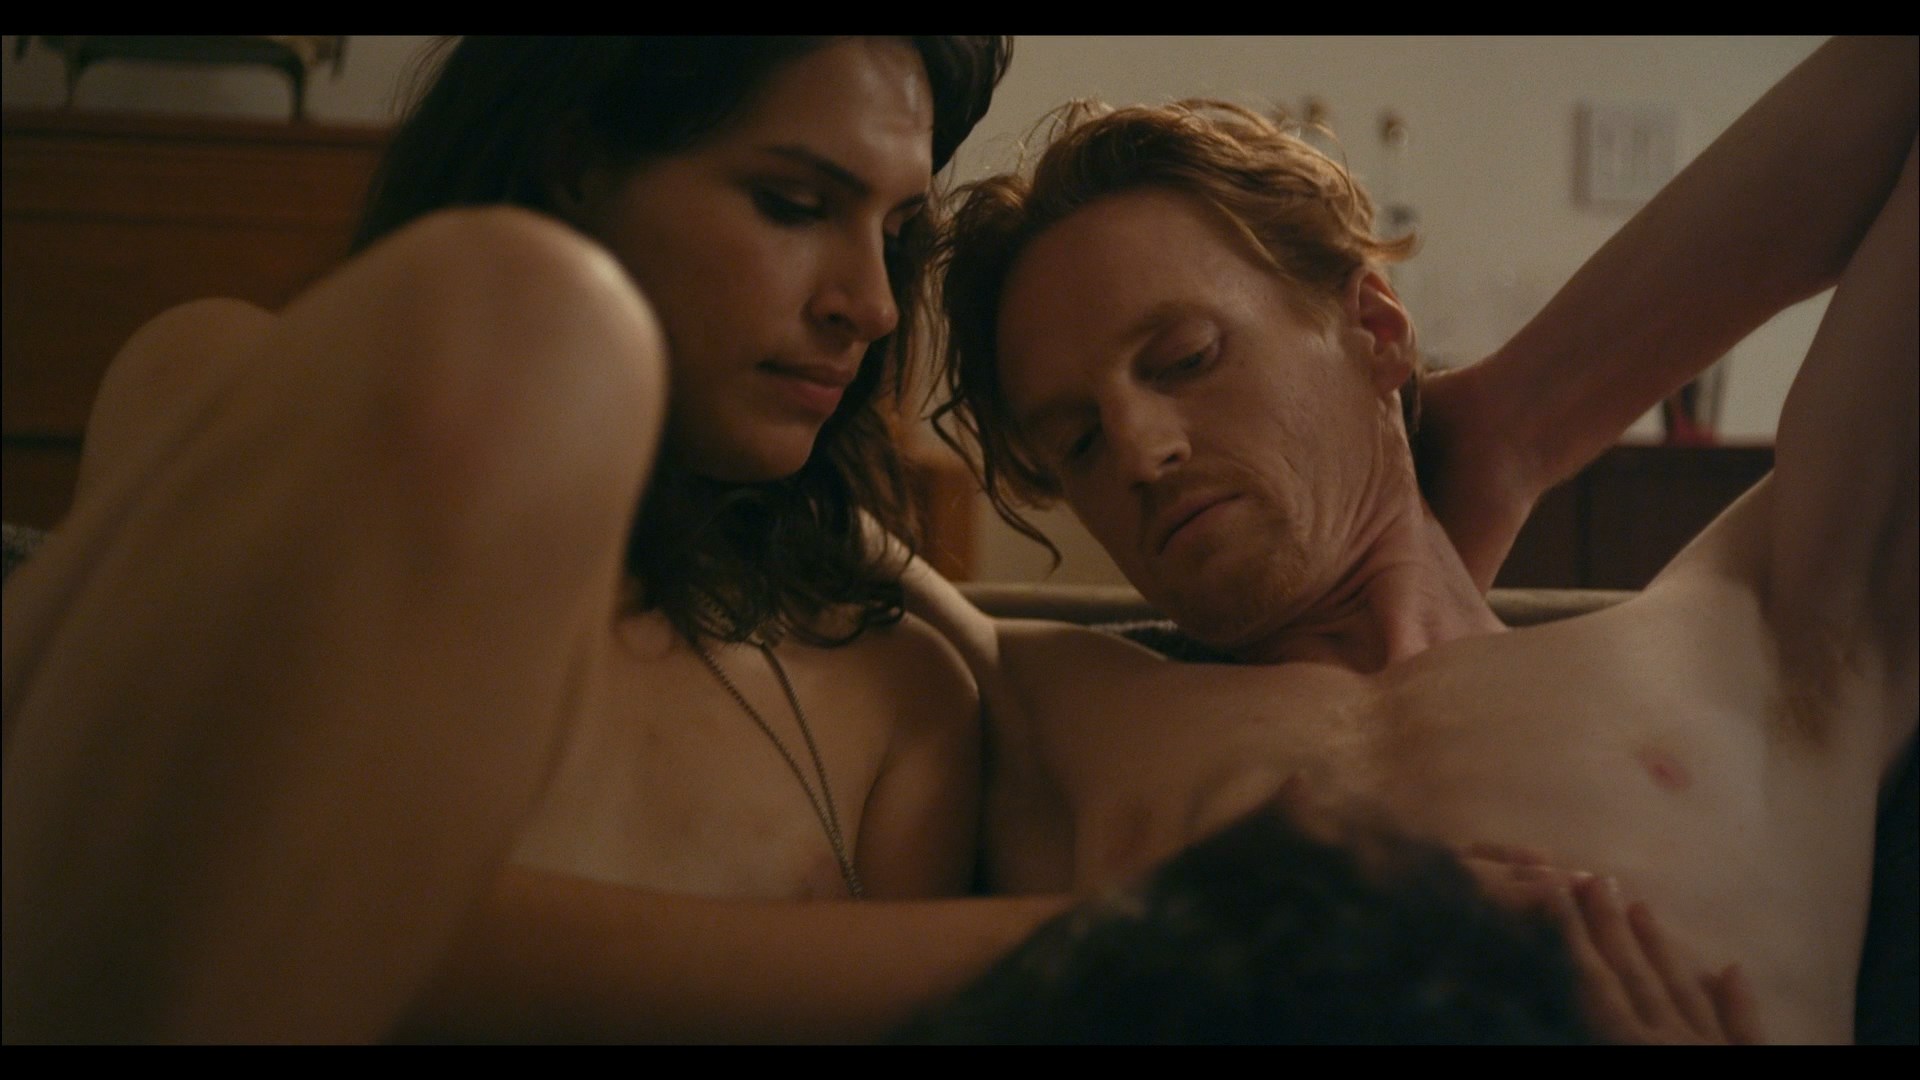 Desiree Akhavan, Robyn Rikoon and some guy are having a threesome. 